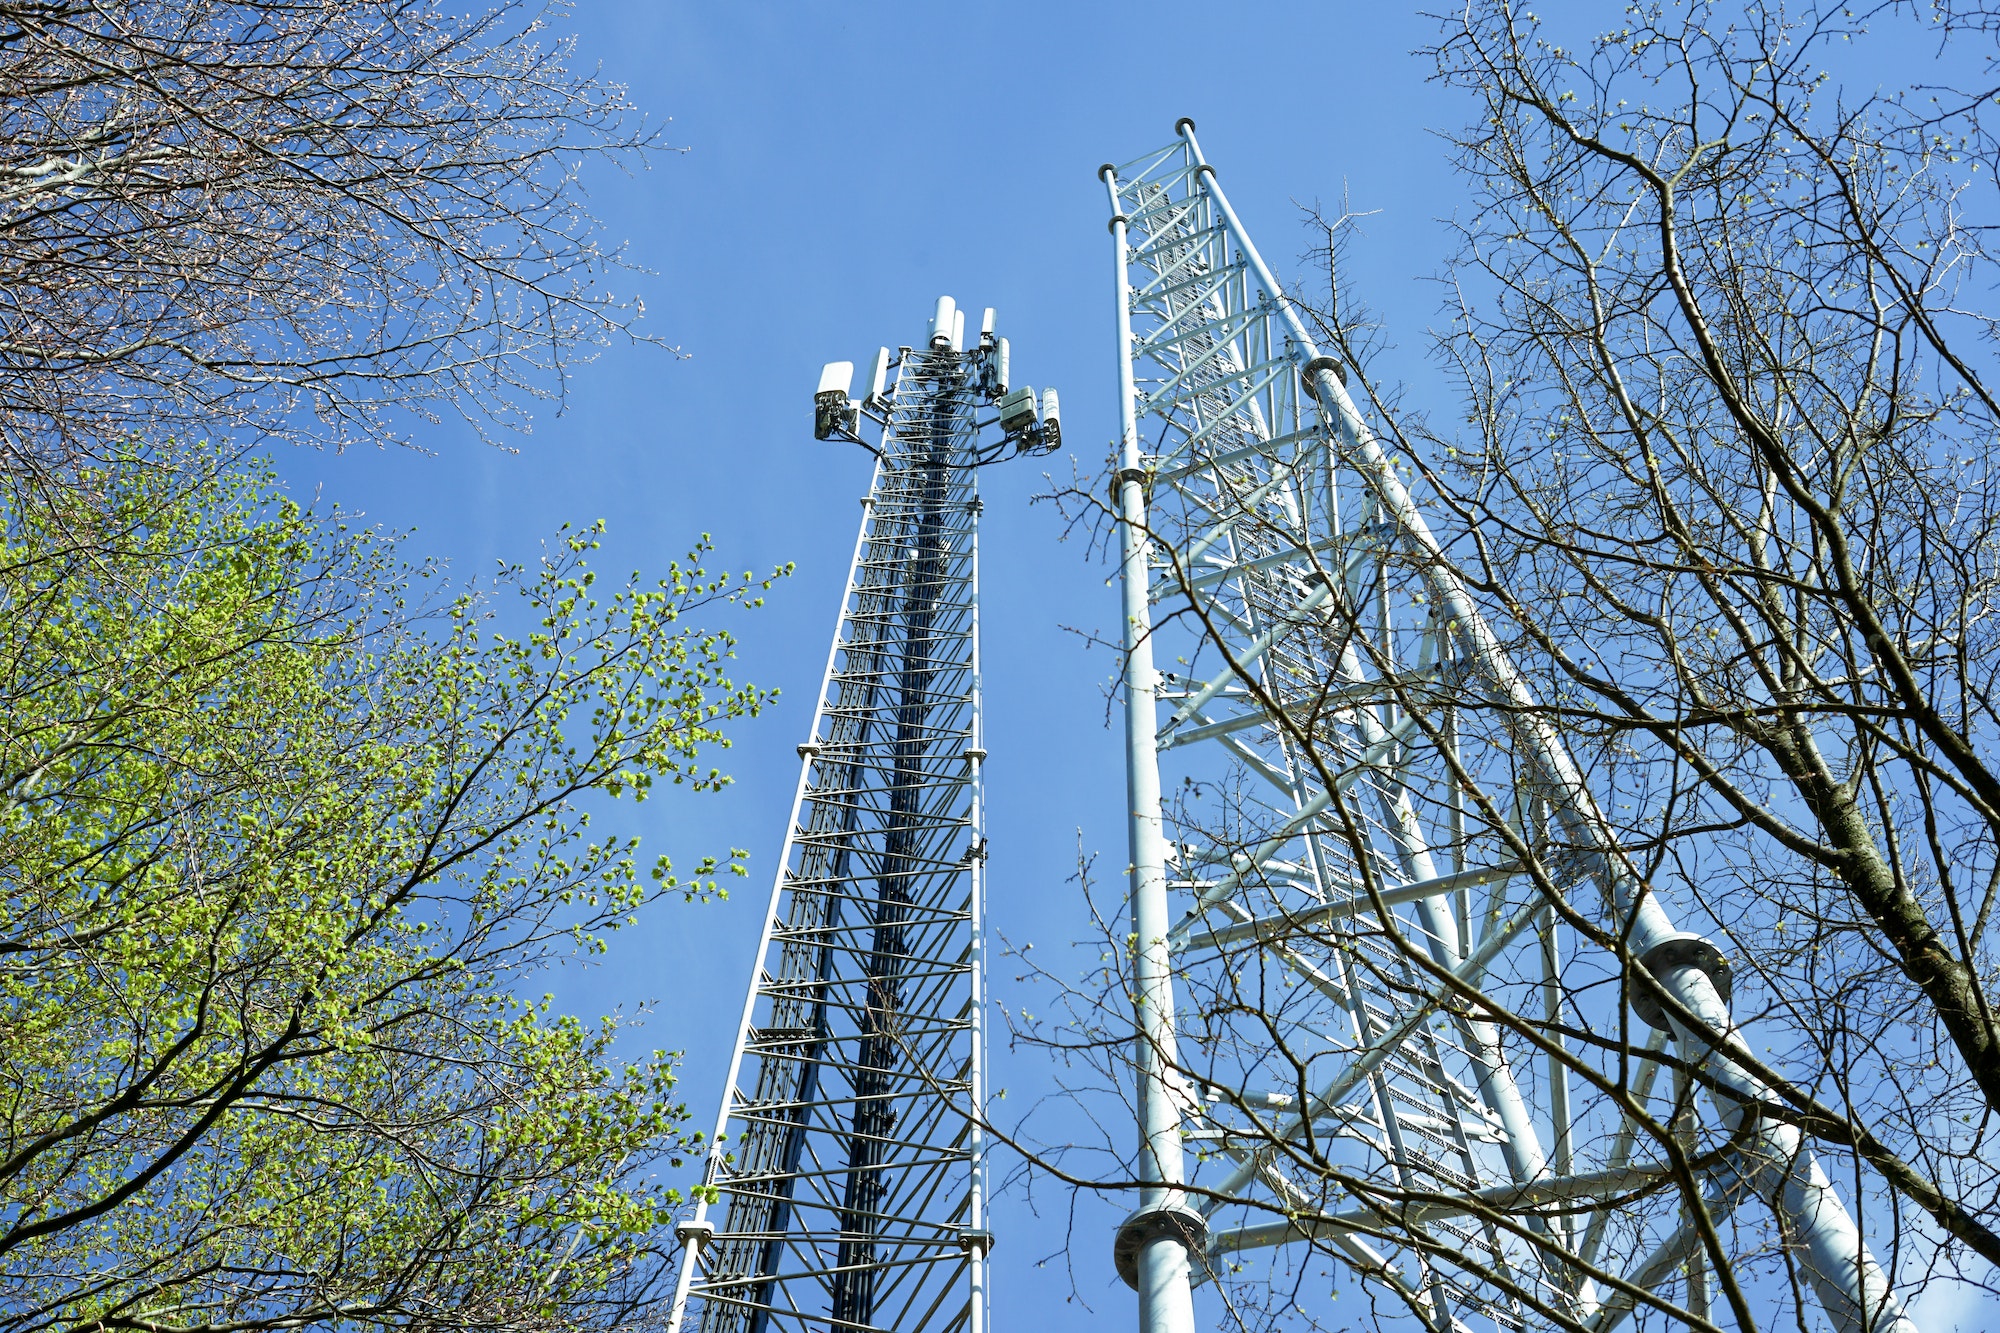 Telecommunication and cell tower, 4G and 5G radio network telecommunication equipment.